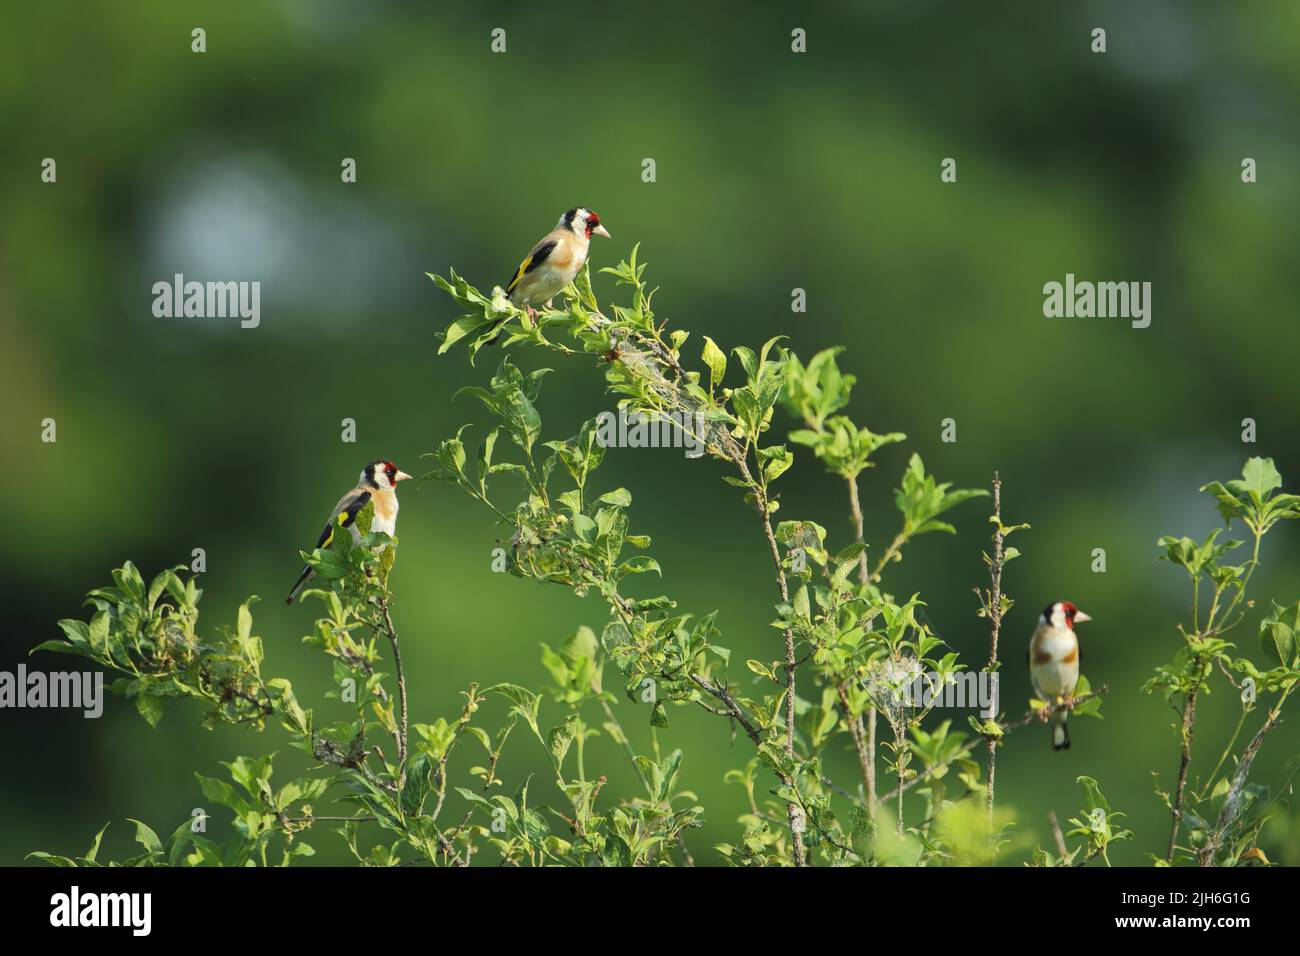 Three european goldfinches (Carduelis carduelis) in the branches of a shrub in Neureut, Karlsruhe, Baden-Wuerttemberg, Germany Stock Photo